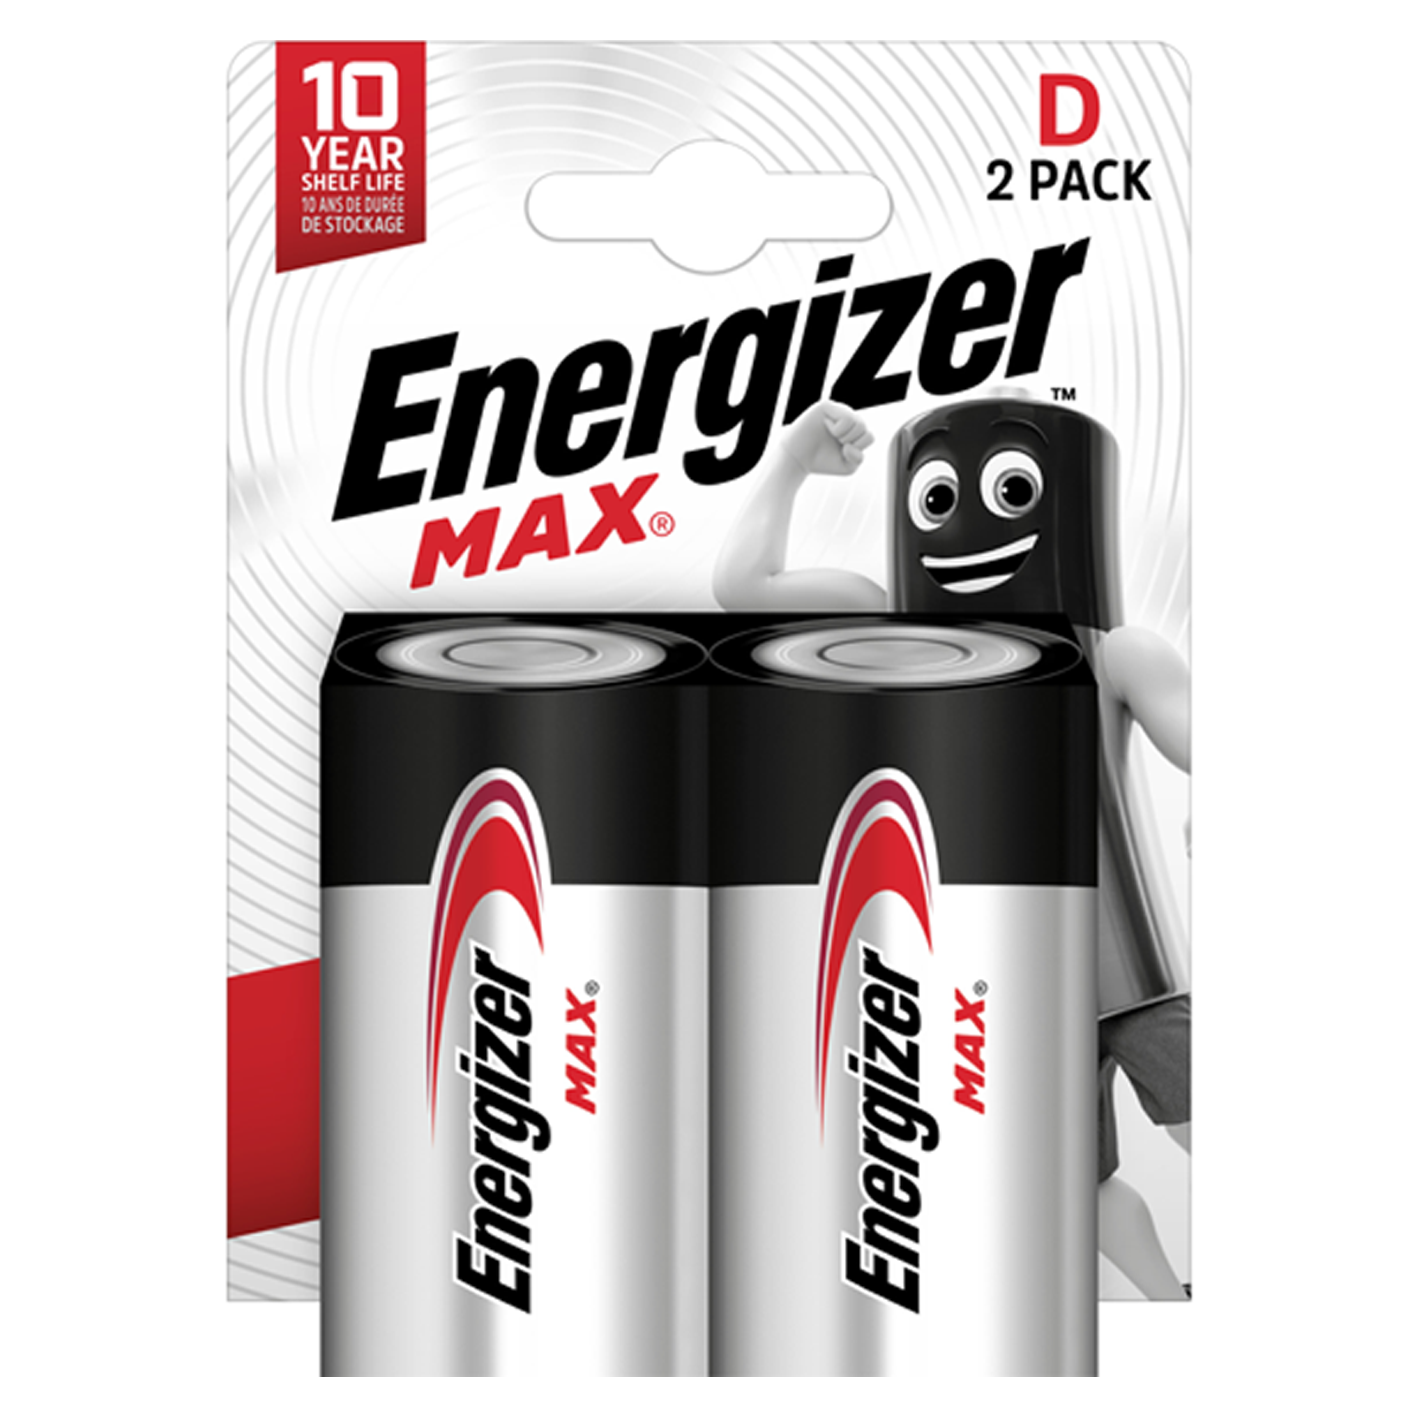 Energizer D Size Max Alkaline, Pack of 2